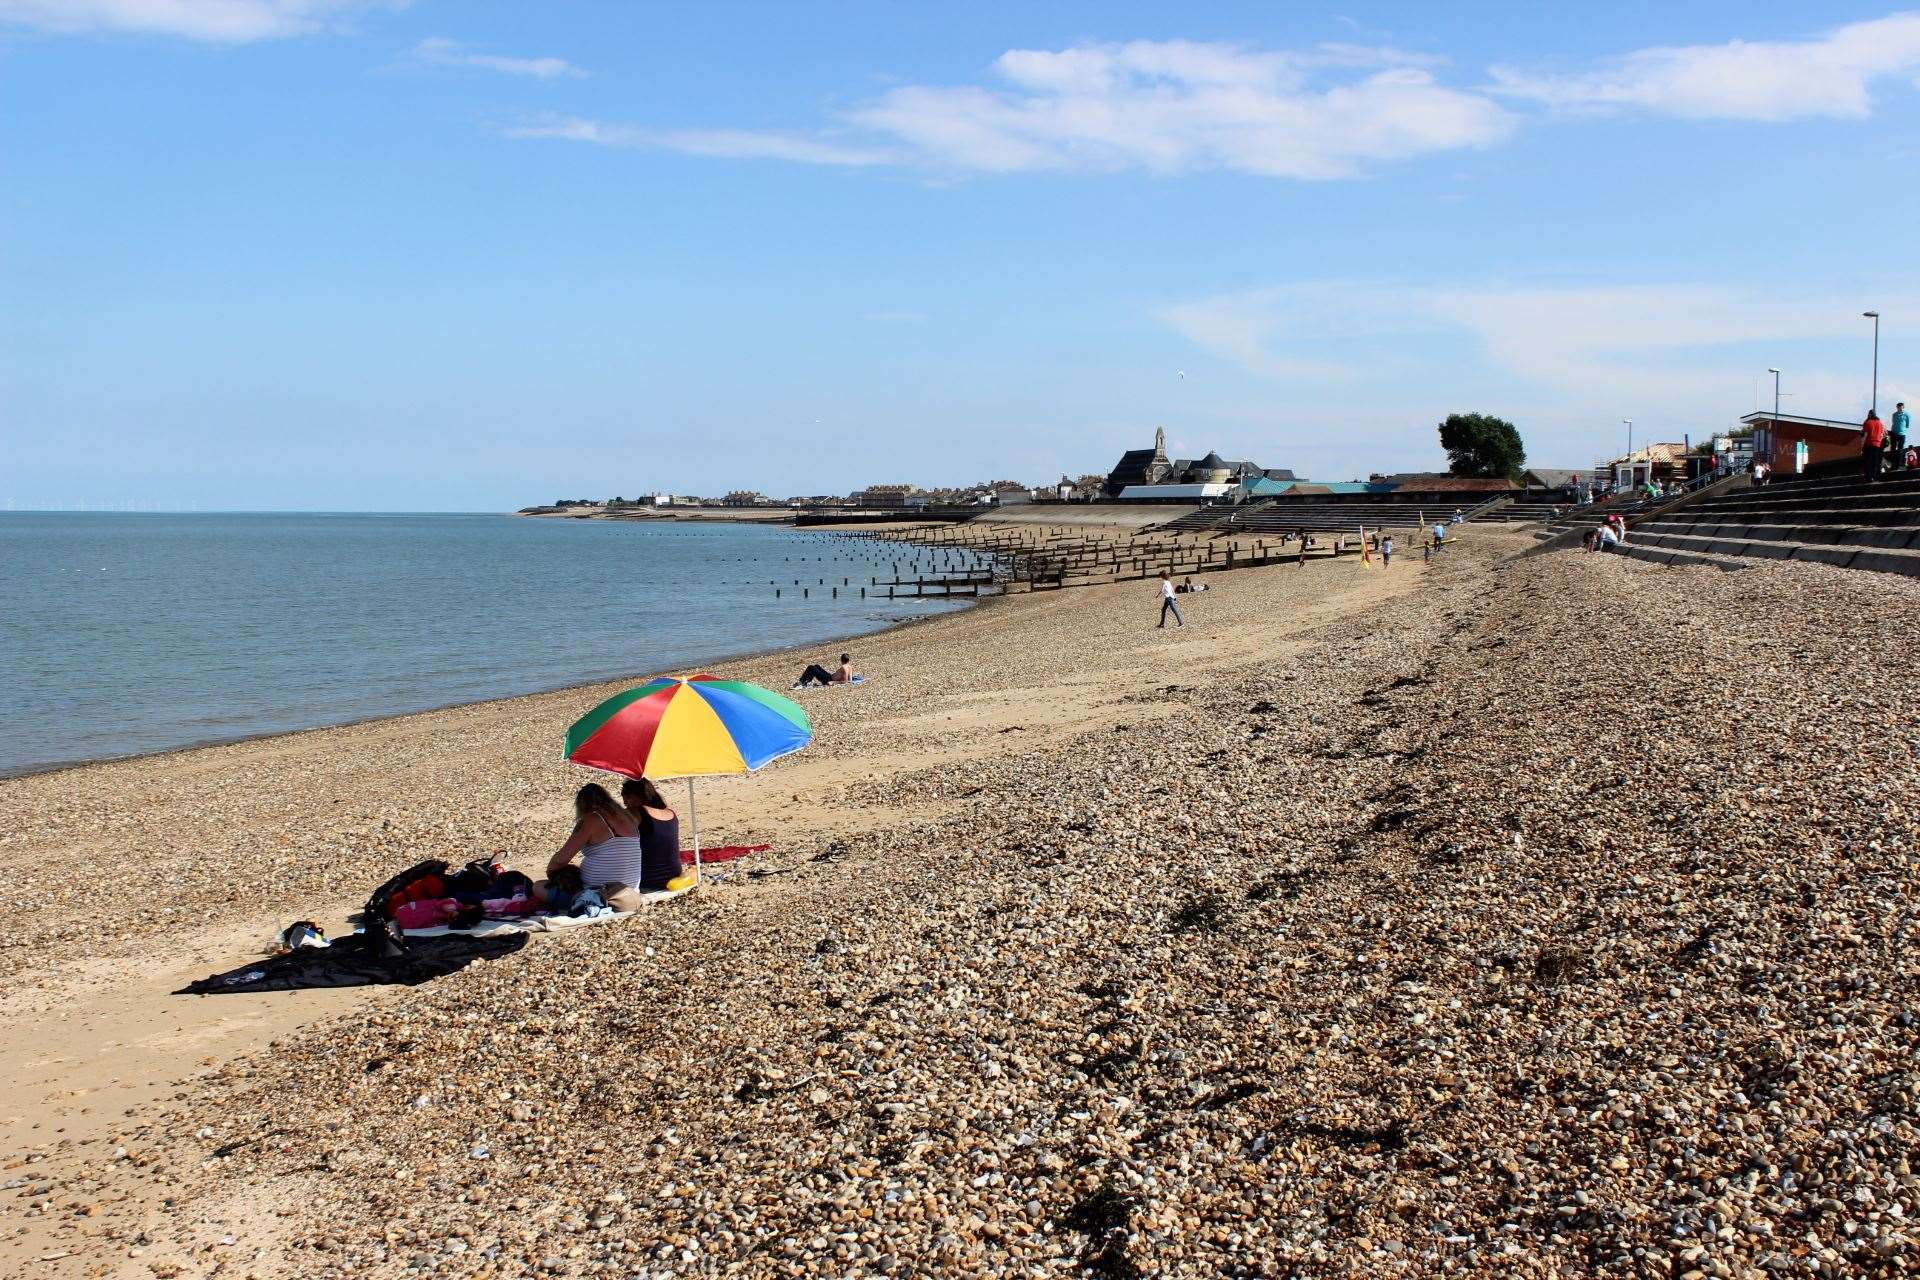 Sheerness beach on the Isle of Sheppey